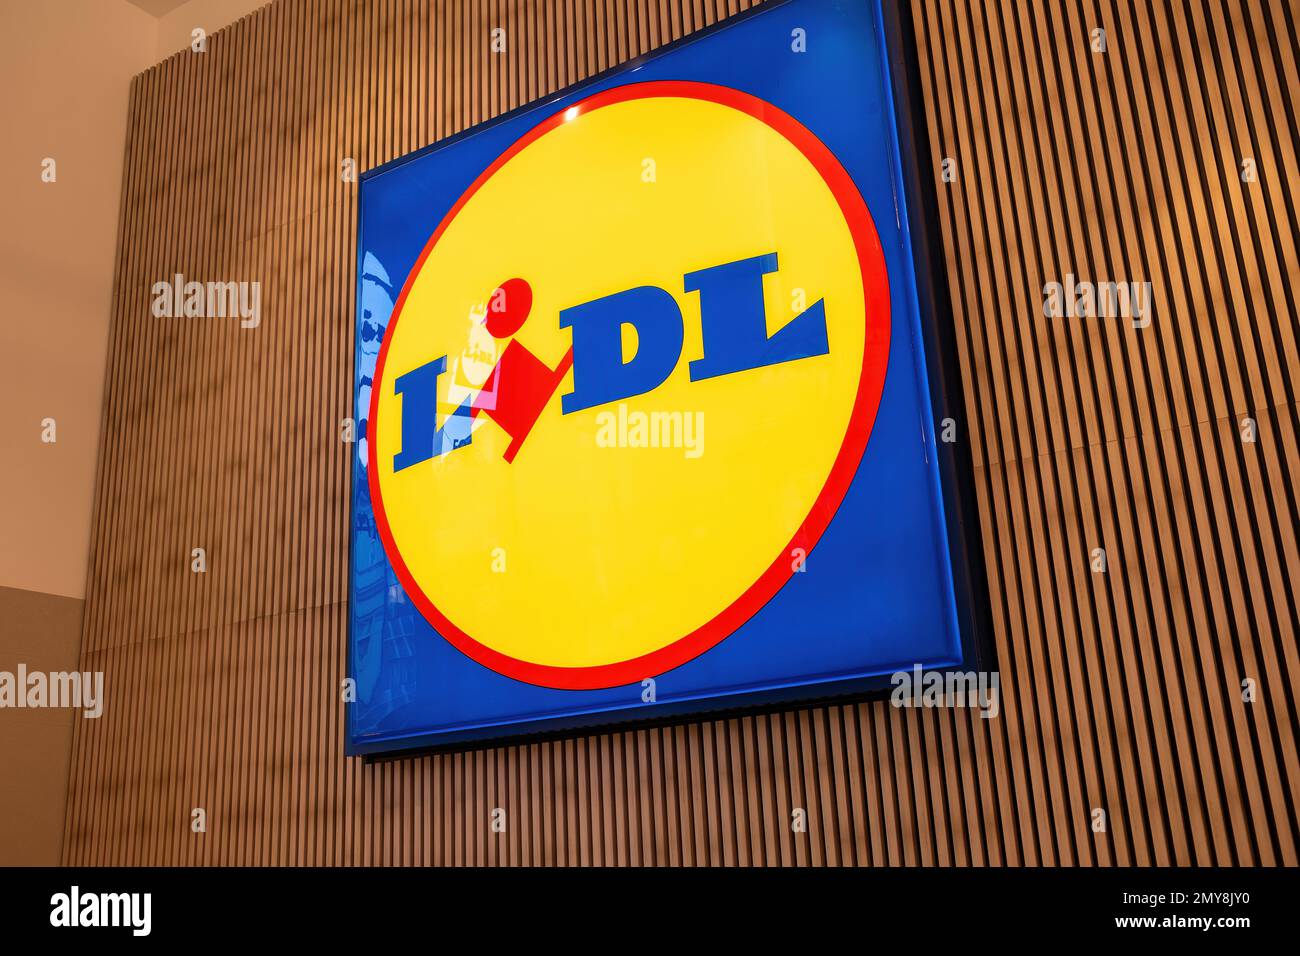 Lidl logo at supermarket building wall. German international discount supermarket retail chain. High quality photo Stock Photo